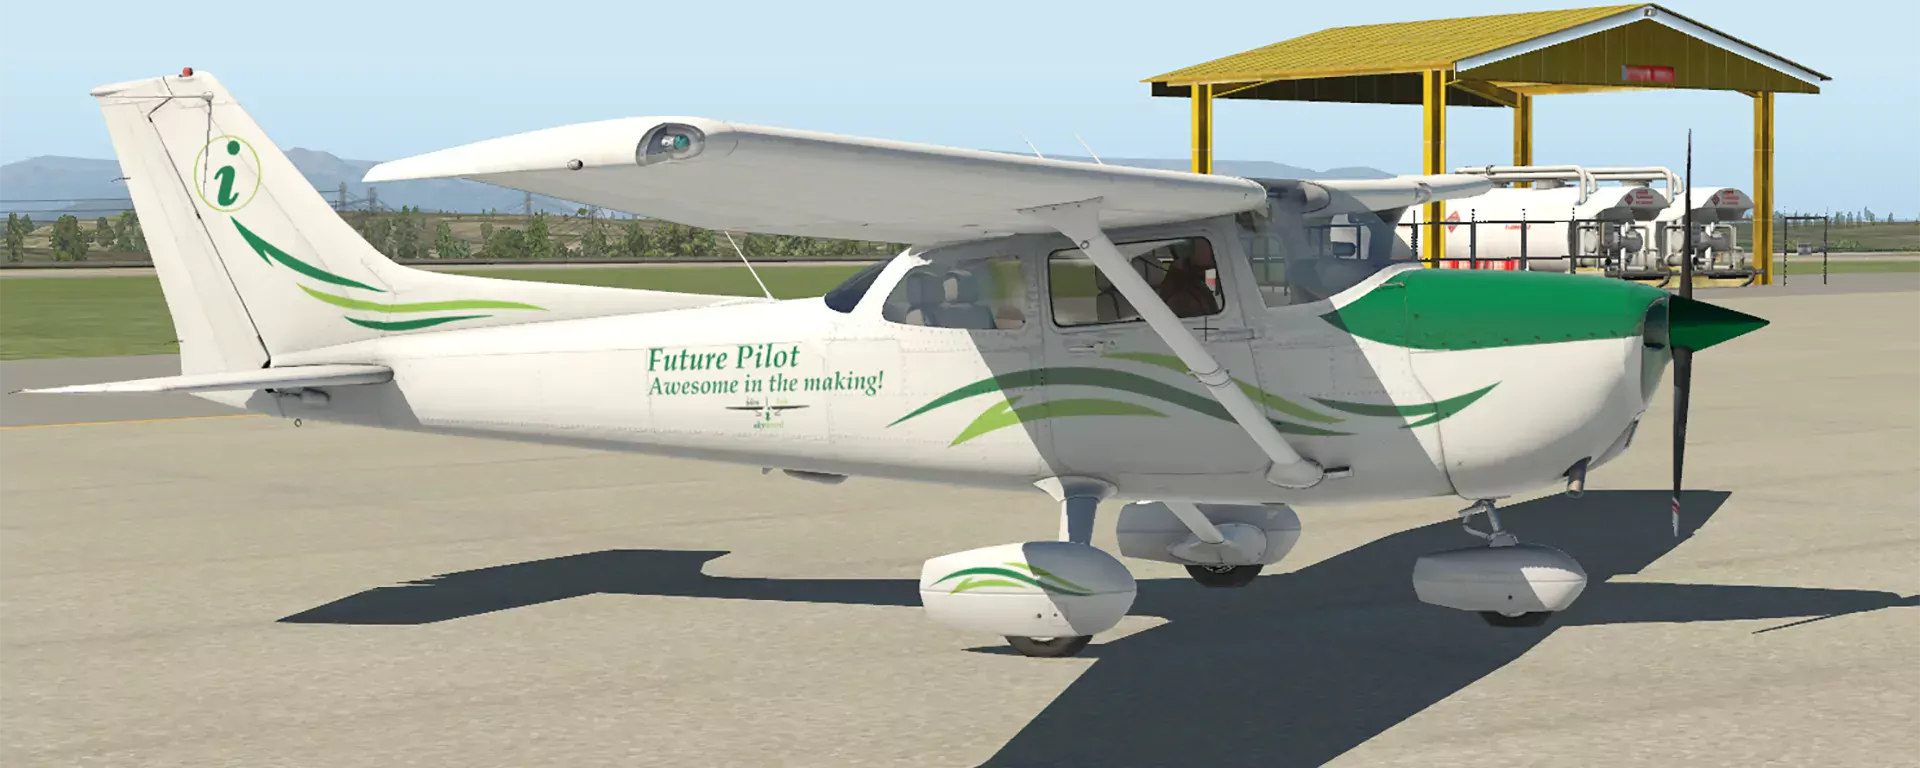 Image of X-Plane 11 Cessna 172 painted for idea lab skyward